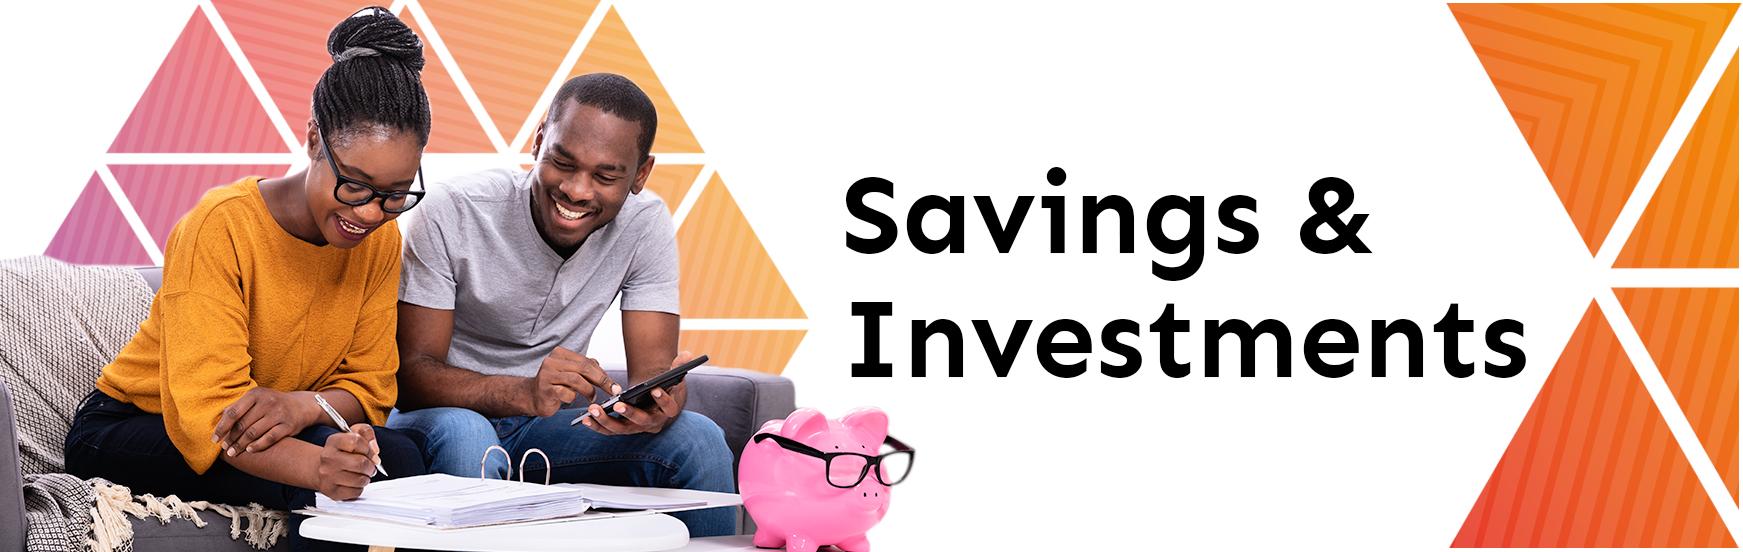 Savings Investments